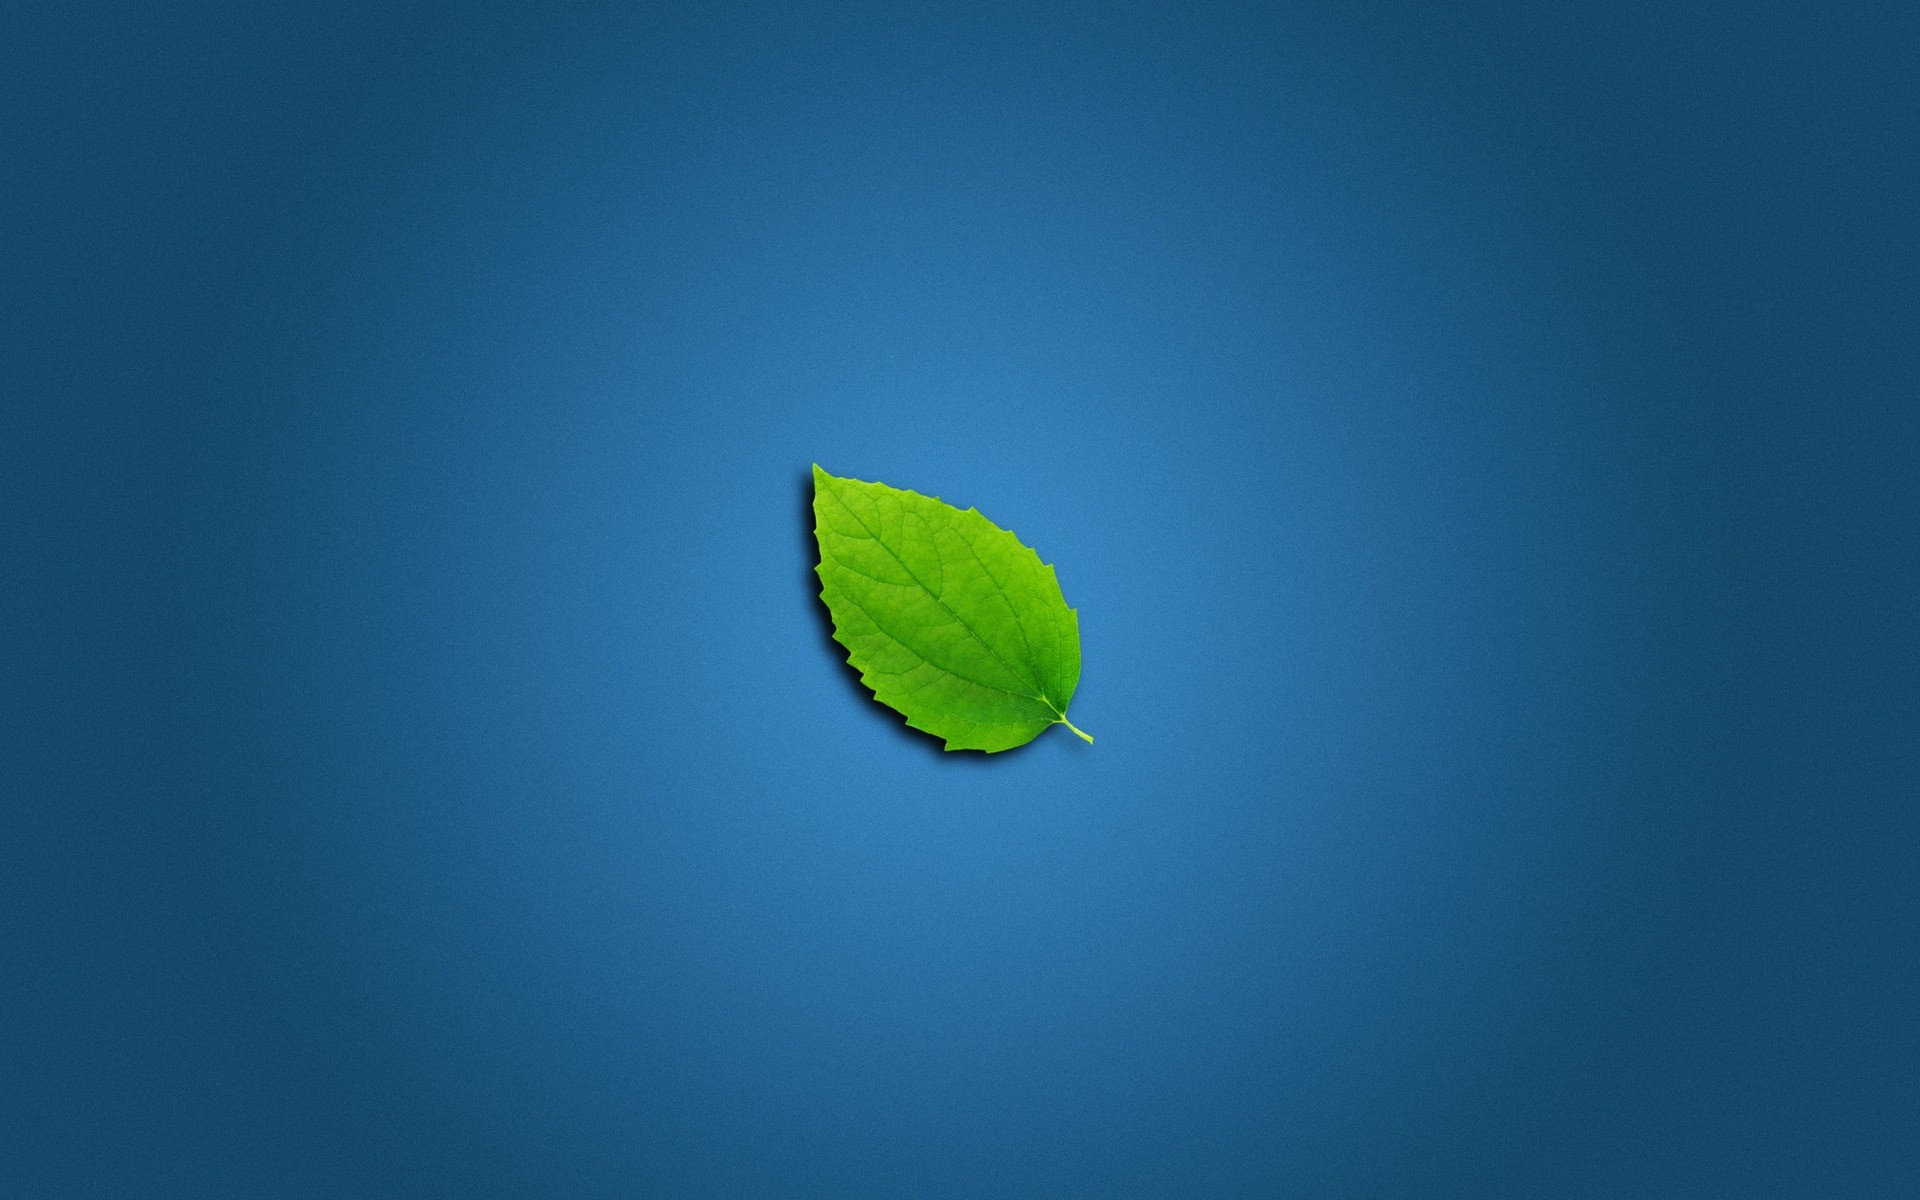 minimalism leaf nature outdoors summer growth sky ecology sun fair weather flora tree blur sprout background green blue